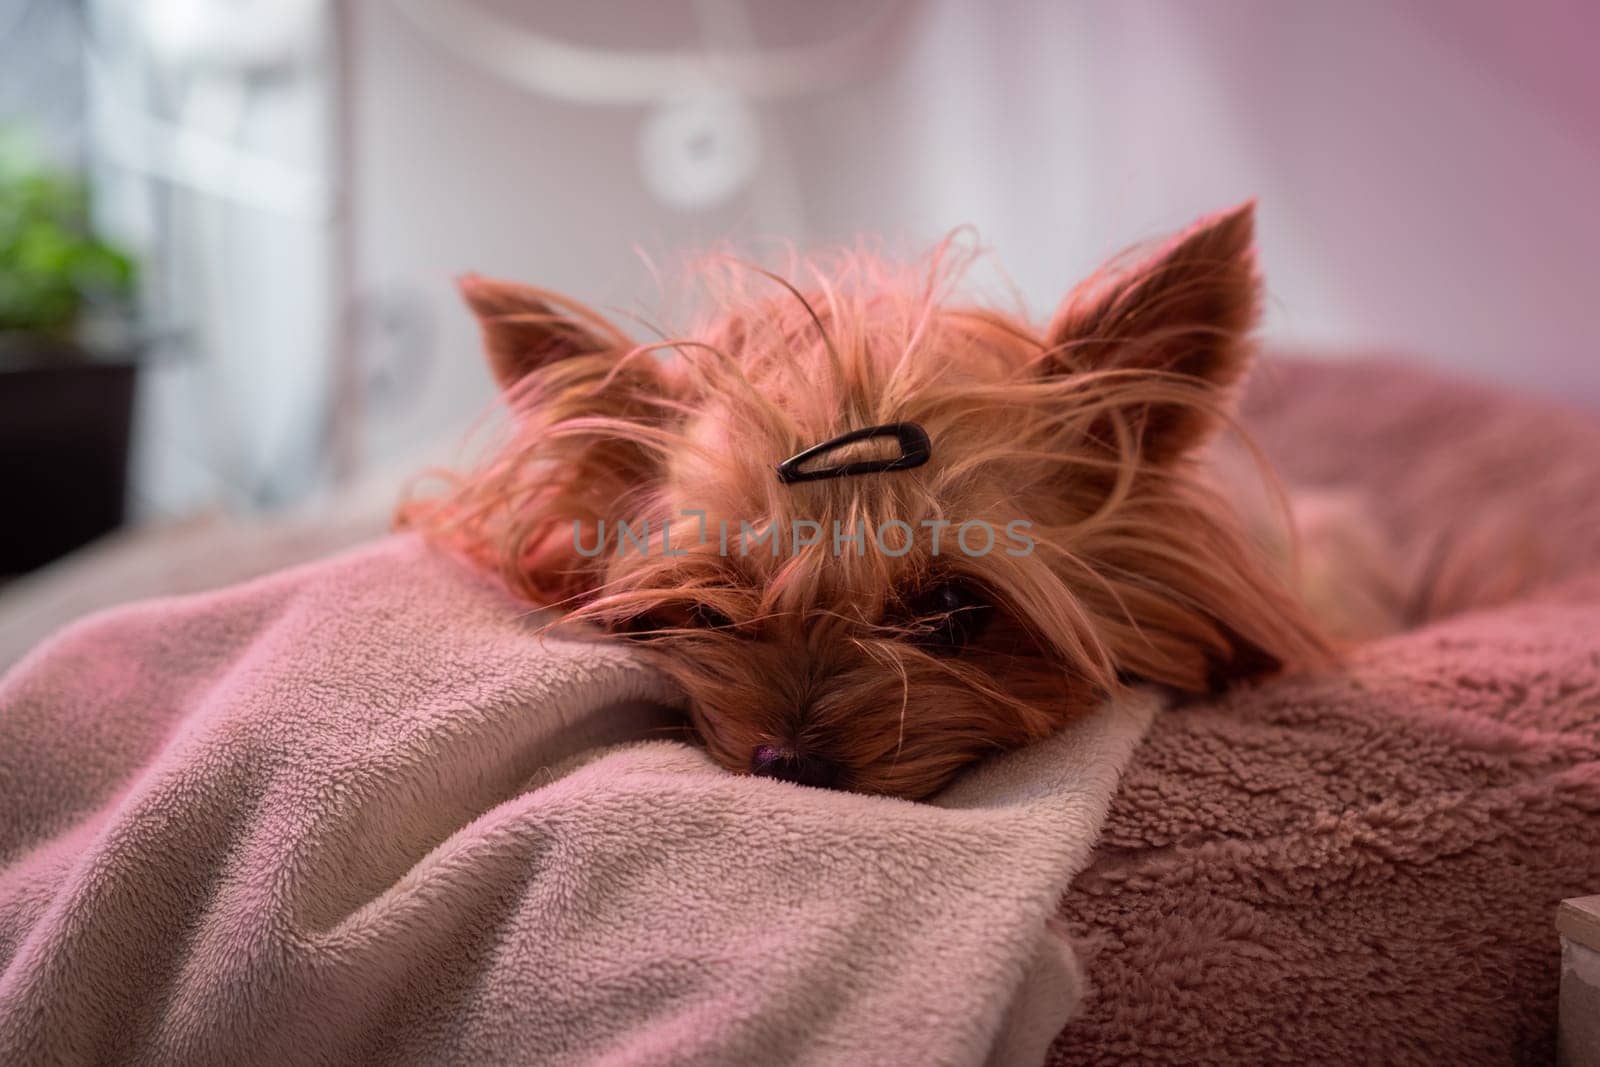 The Yorkshire Terrier dog is lying on the couch and resting. A beautiful pet dog by AnatoliiFoto